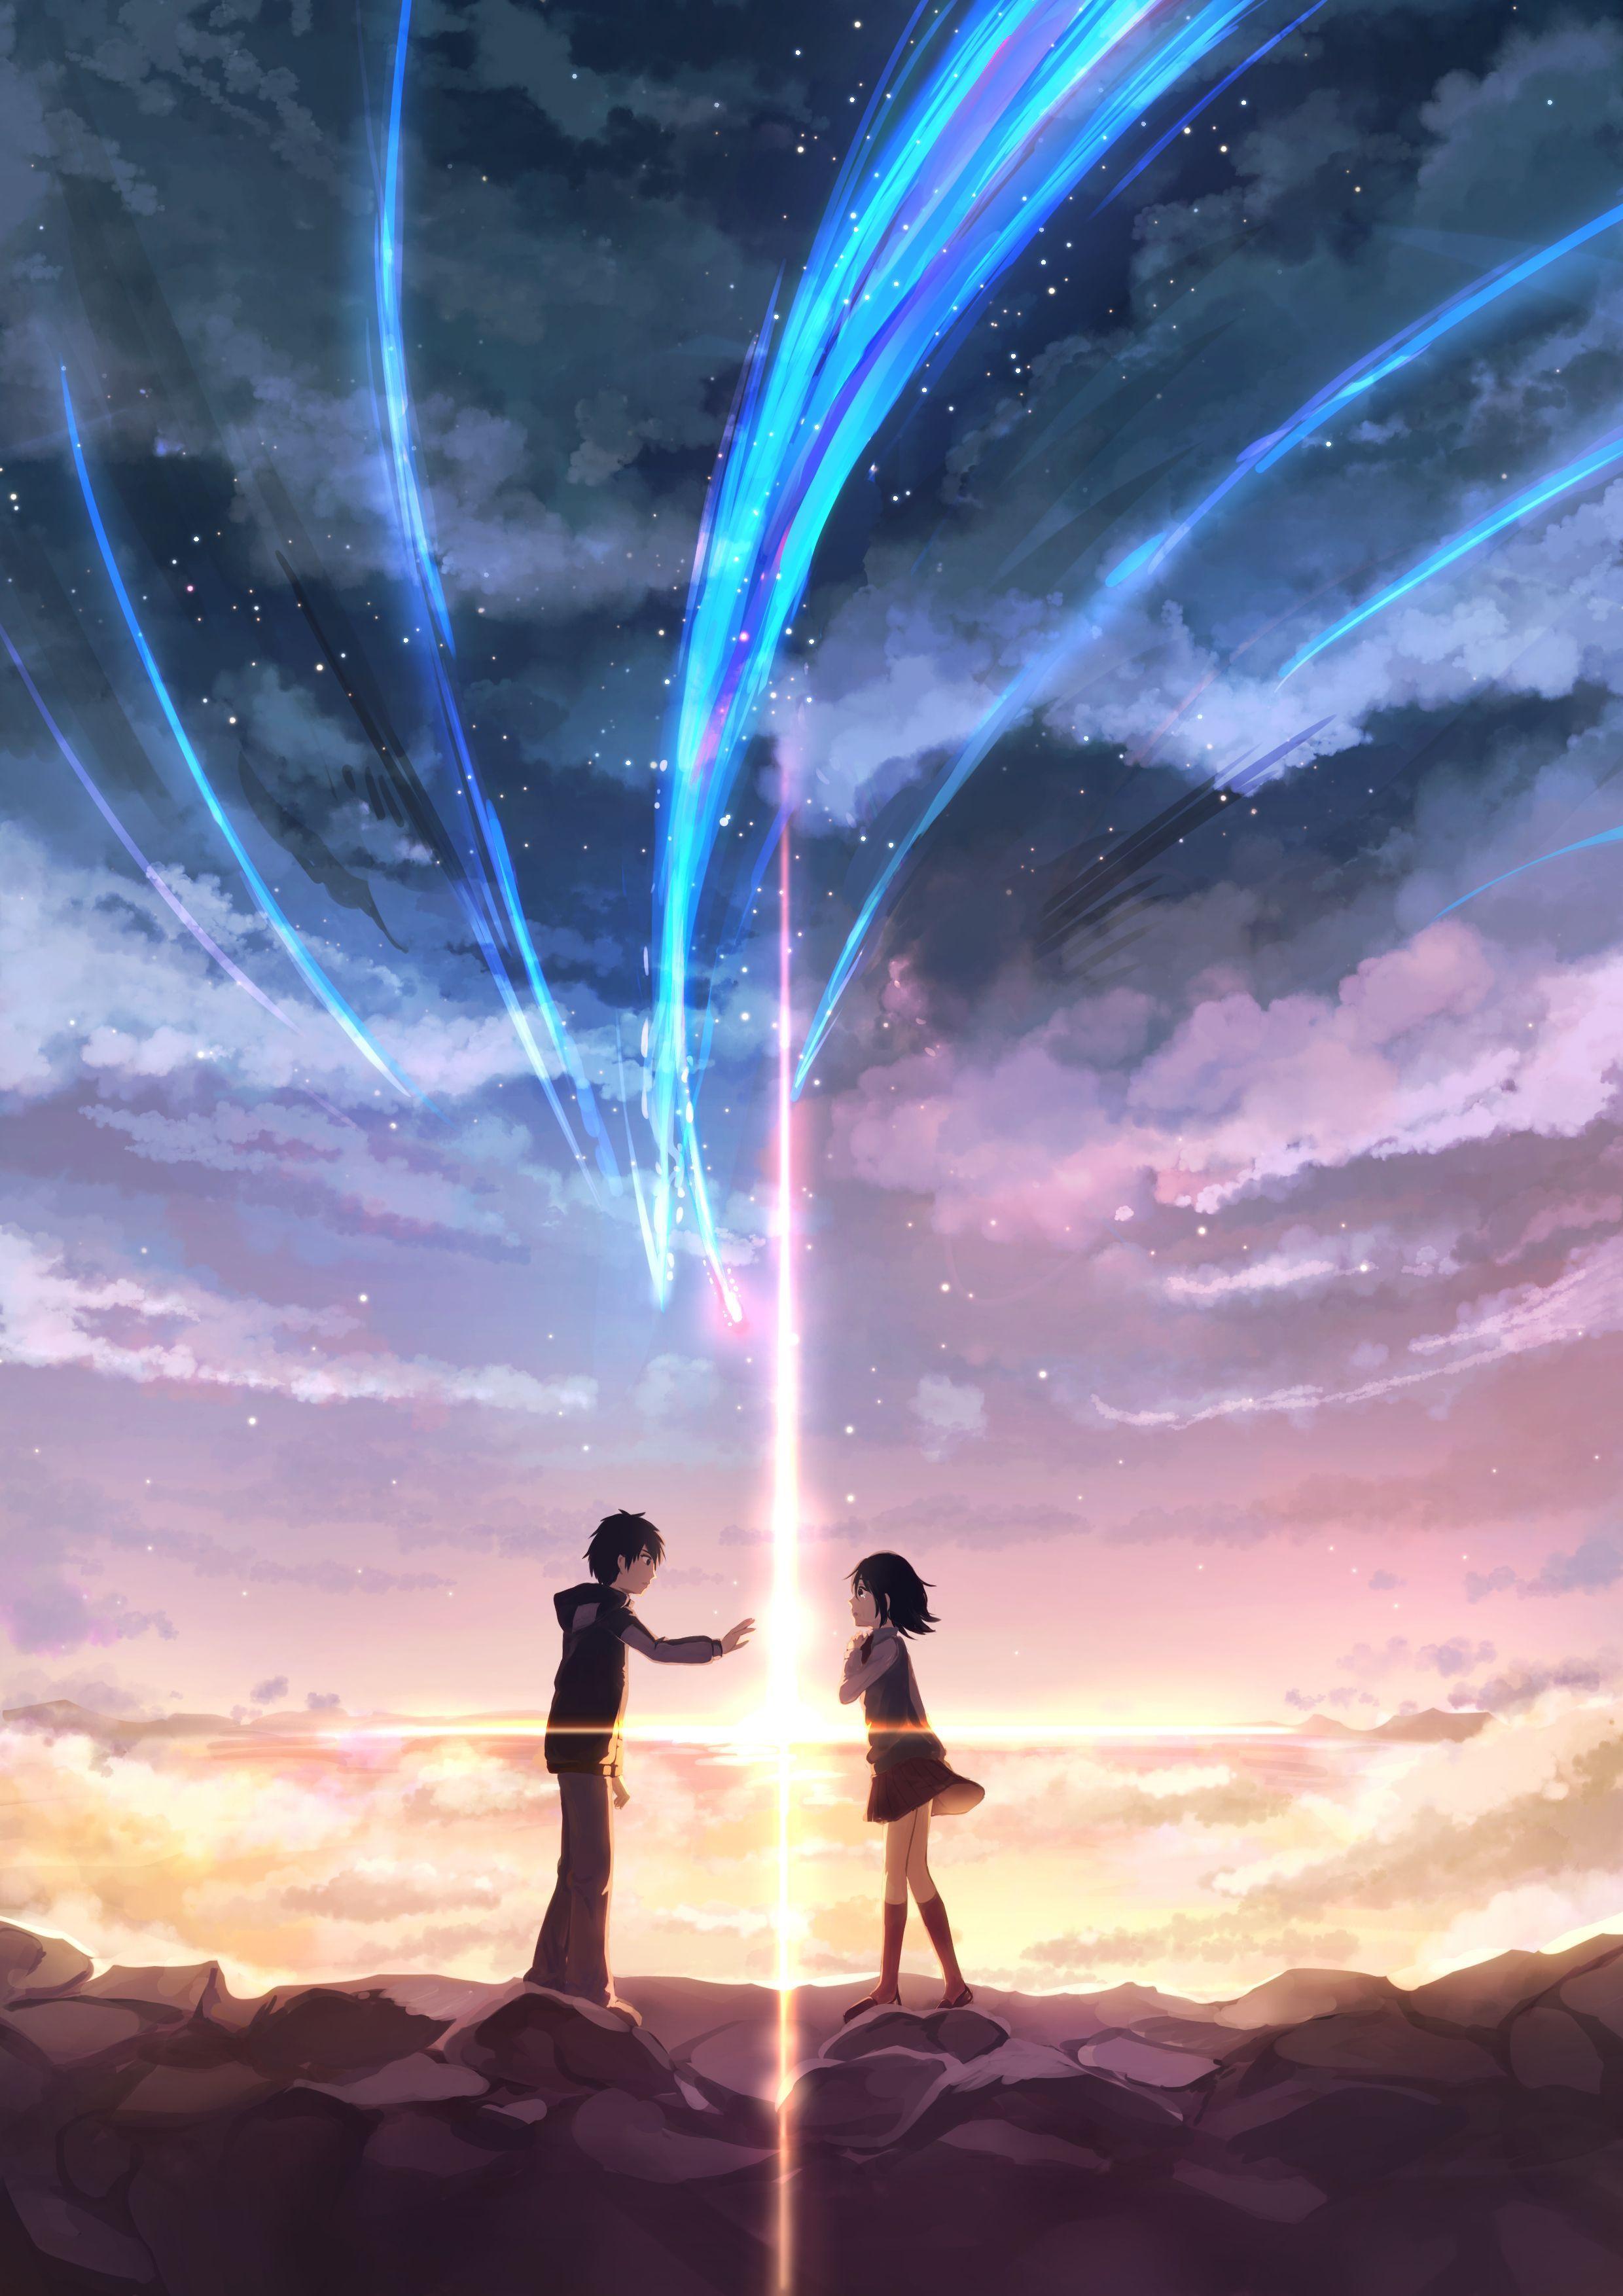 Your Name. I loved this movie and I loved the soundtrack more